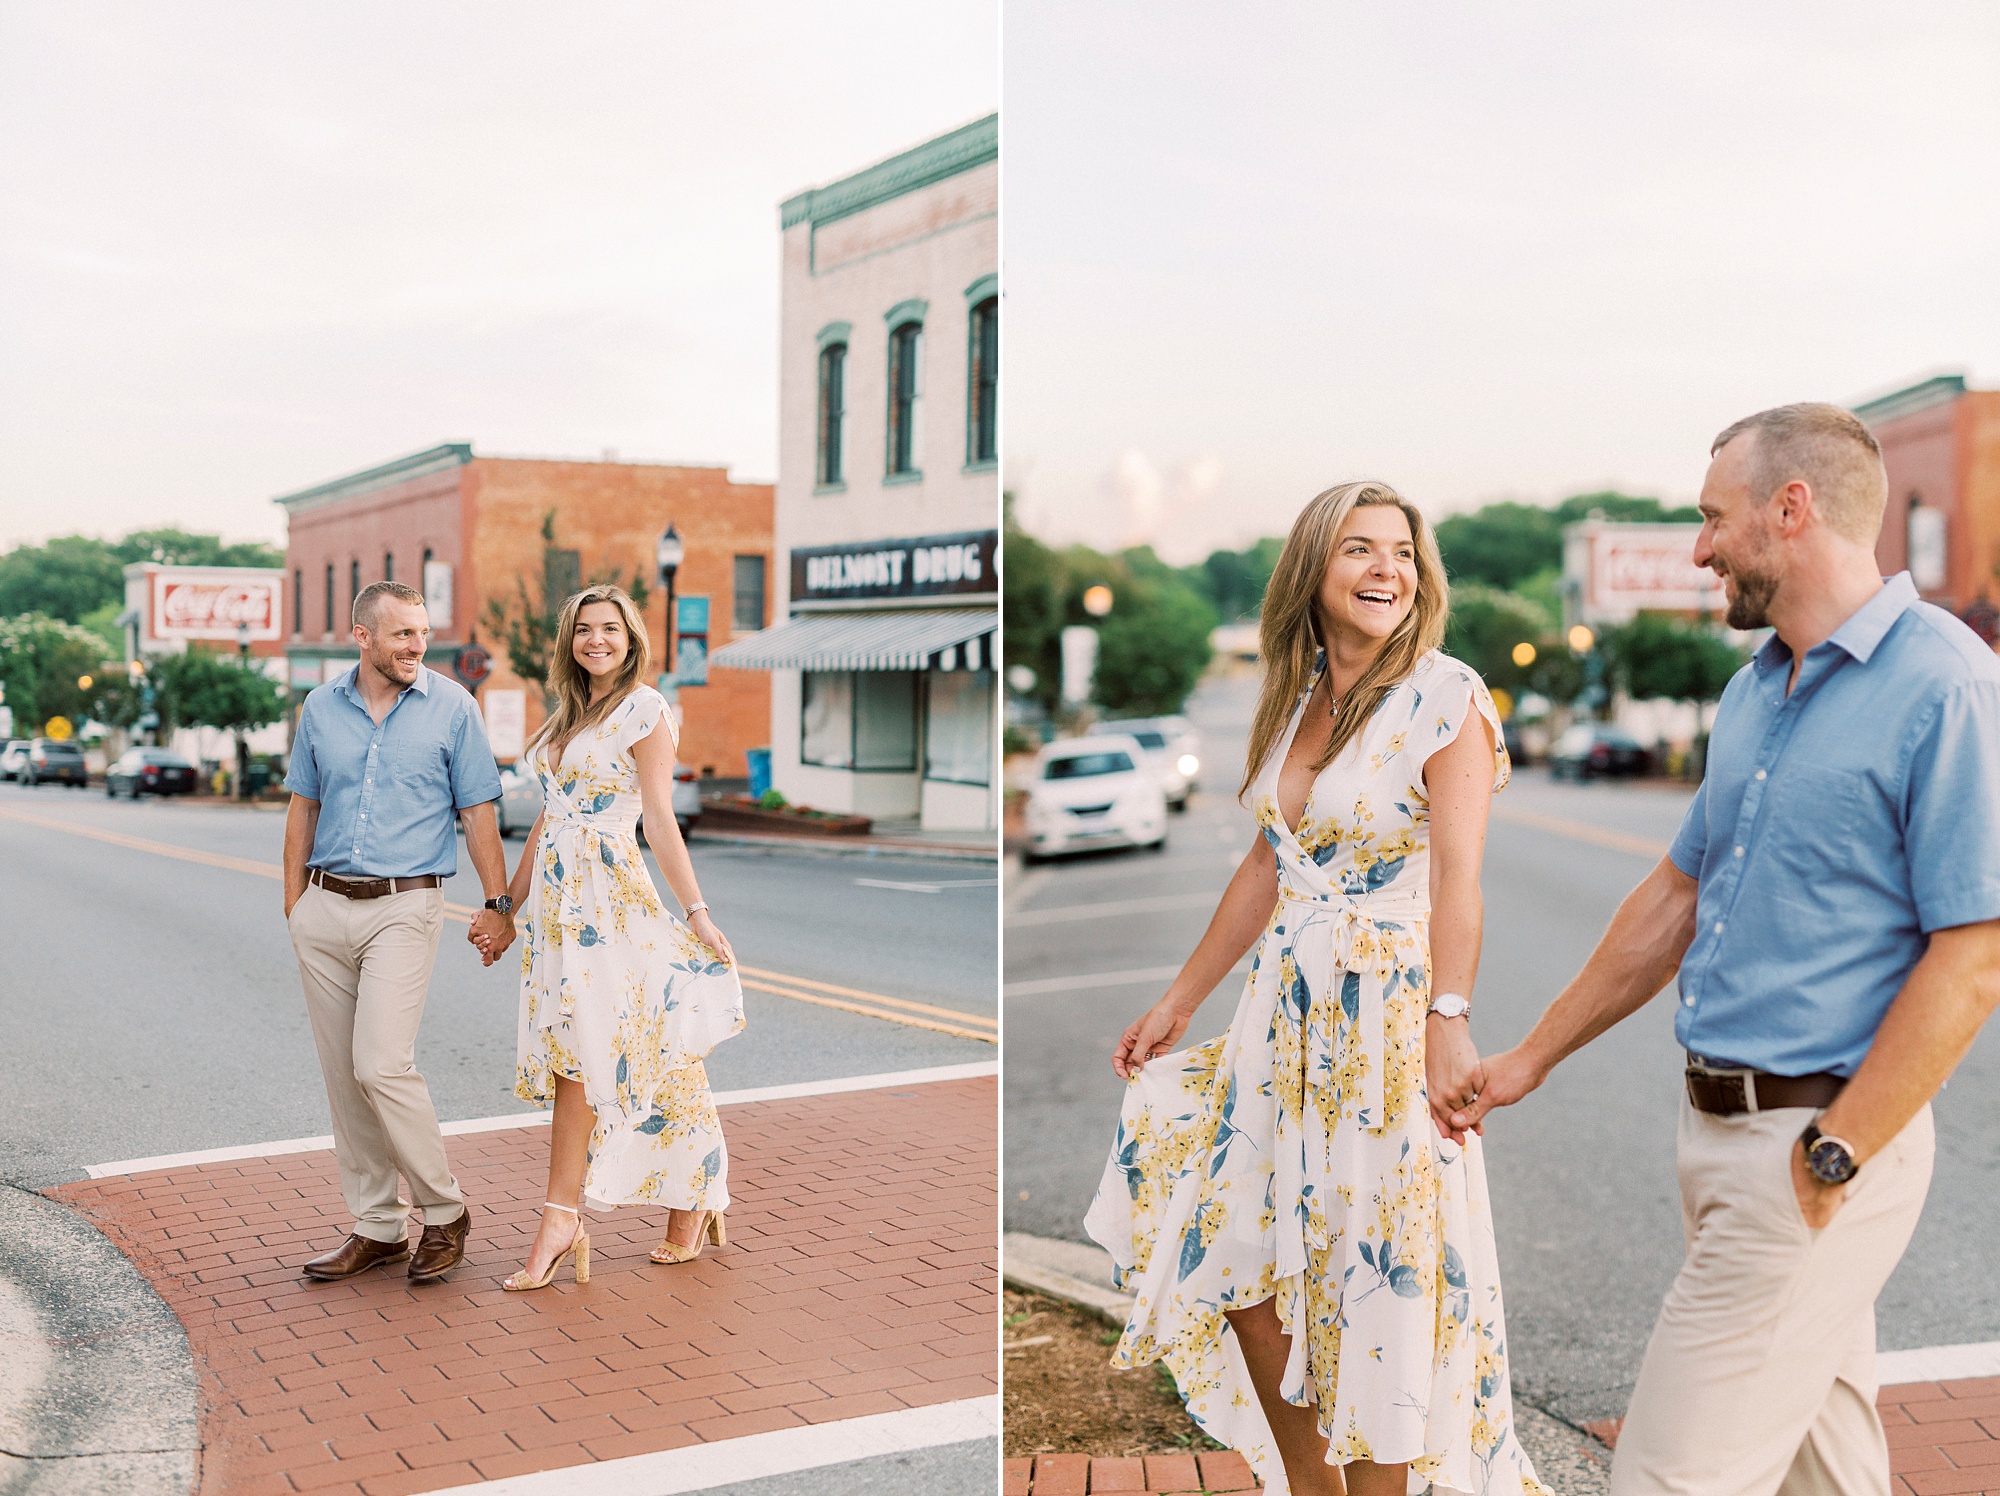 Downtown Belmont engagement session with couple walking through crosswalk